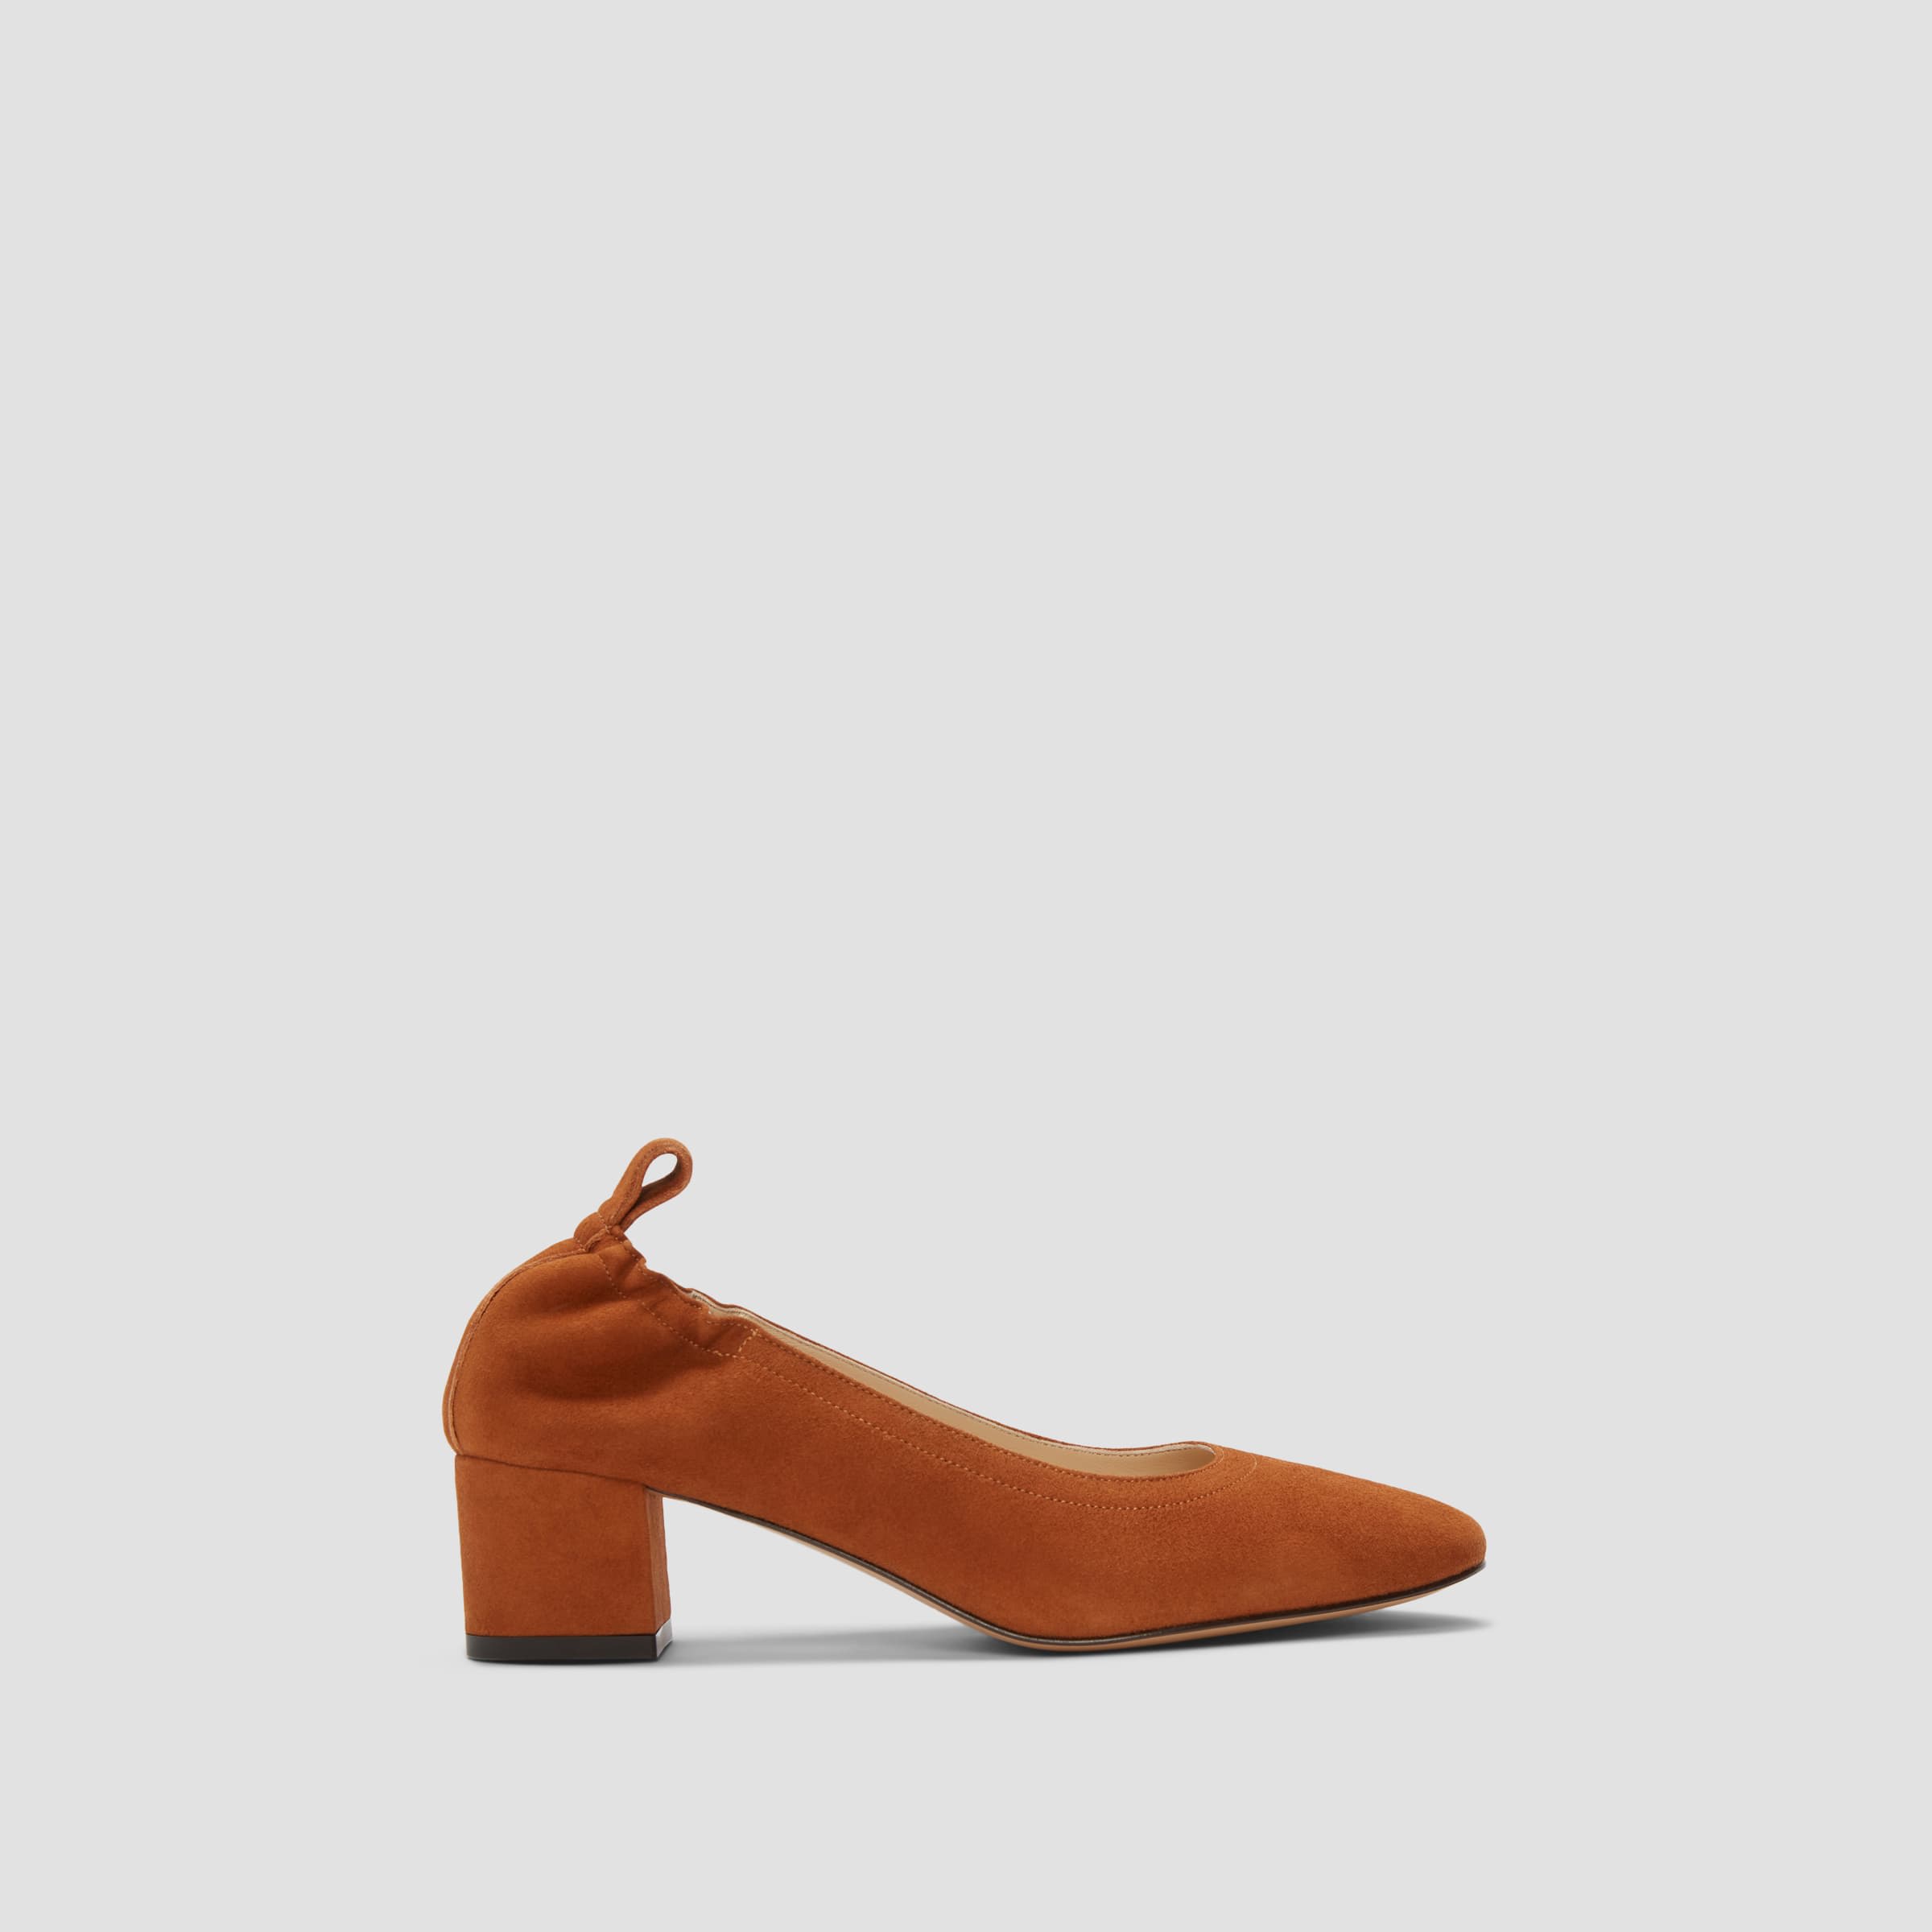 Ideal Shoes Tyla Suede Block Heel Sandals in Brown | iCLOTHING - iCLOTHING